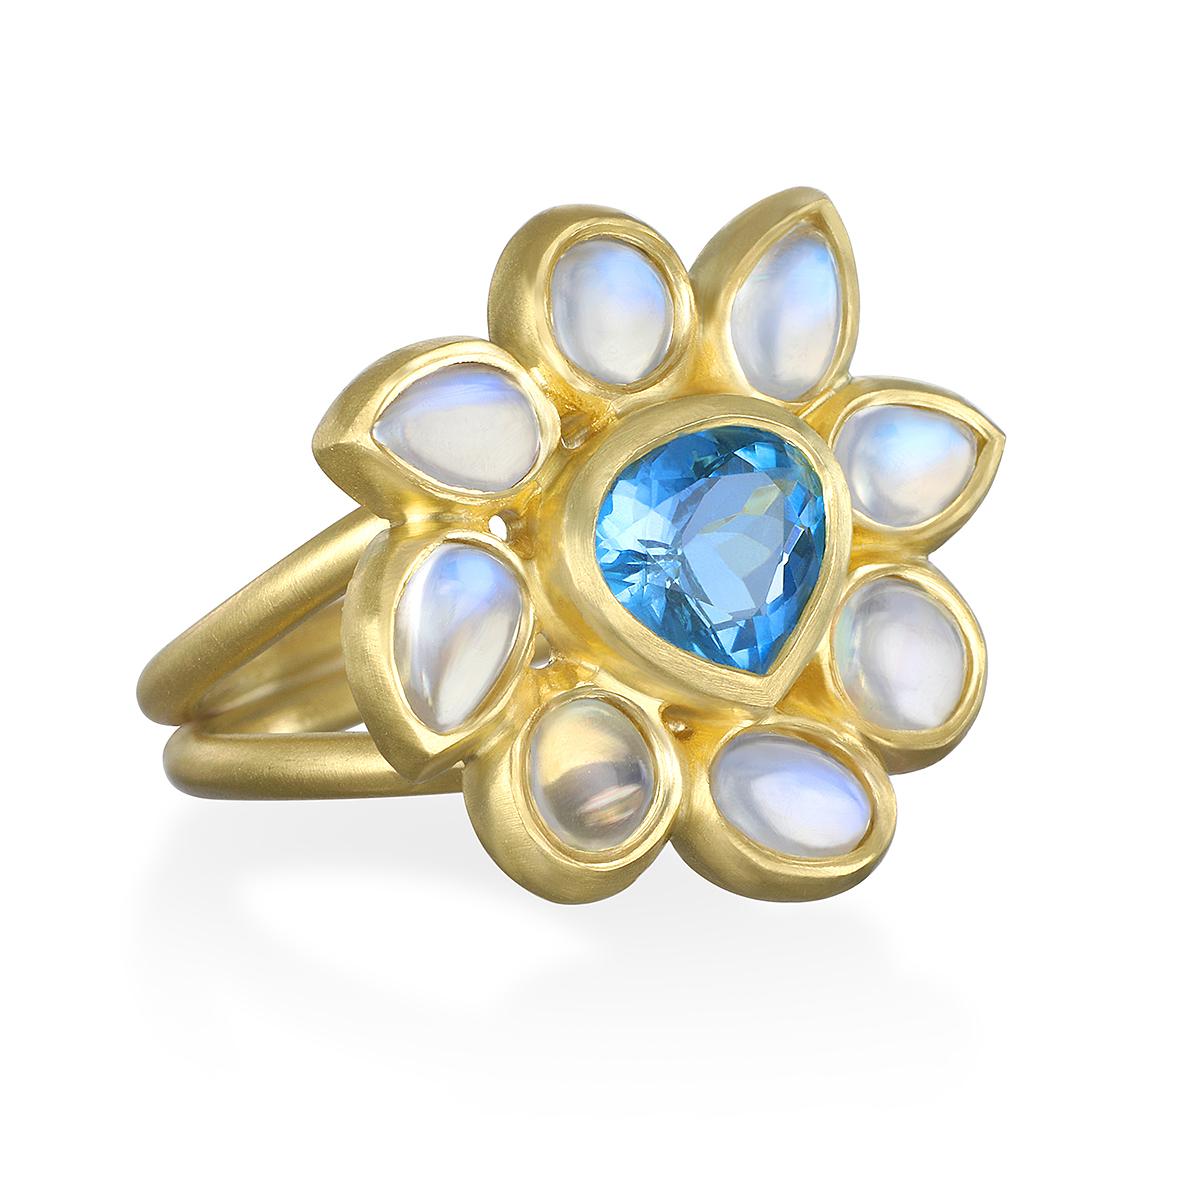 One of a Kind and Unique, Faye Kim's Ceylon Blue Moonstone Daisy Ring features a beautiful deep blue Aquamarine center.  Known for its beautiful adularescence, the blue flash adds to the overall mystique surrounding moonstones and beautifully